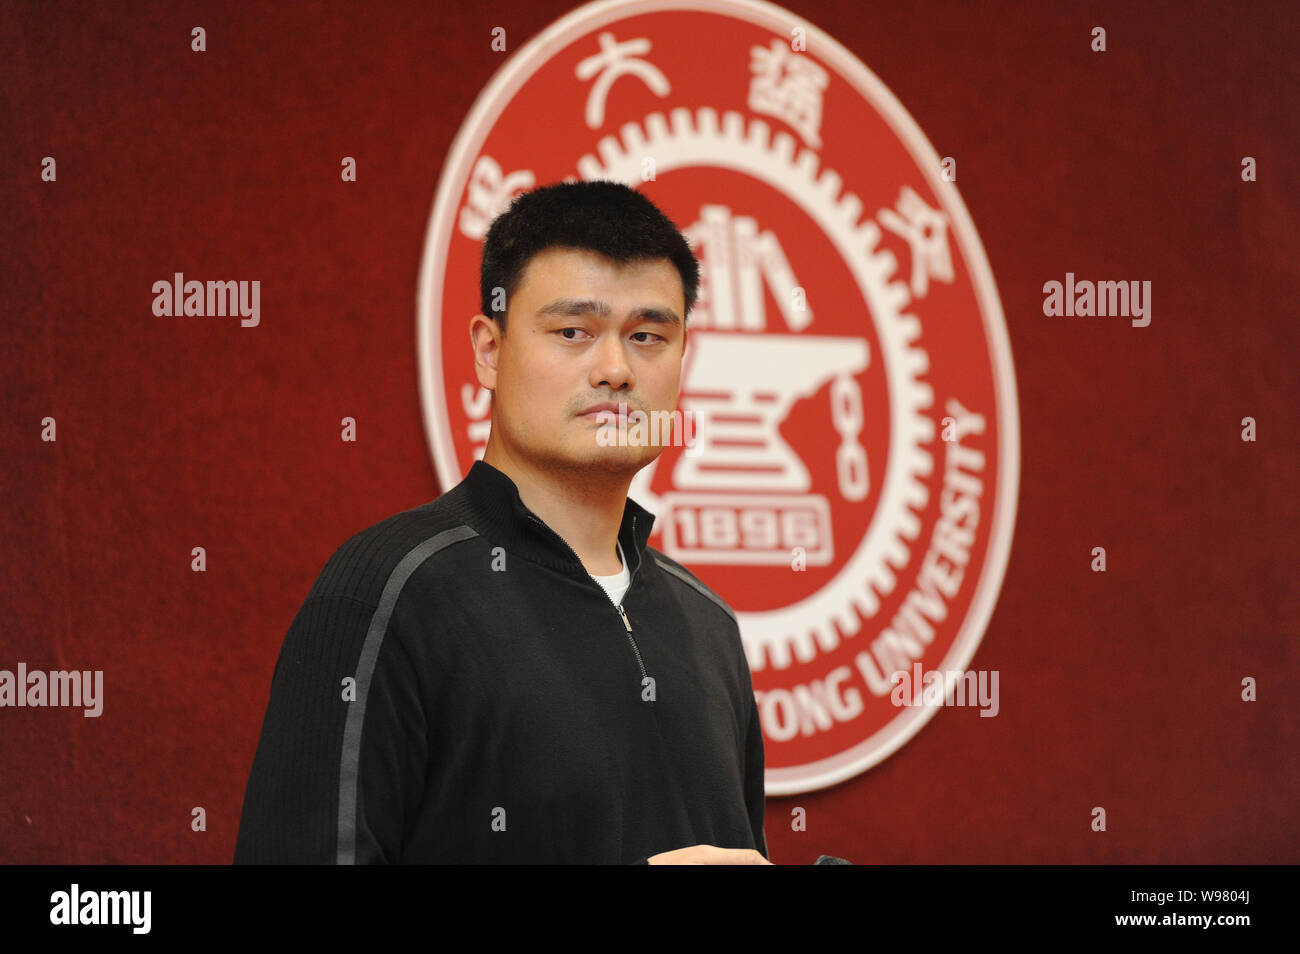 Retired Chinese NBA star Yao Ming is pictured during a press conference for his entrance to school in Shanghai Jiao Tong University in Shanghai, China Stock Photo